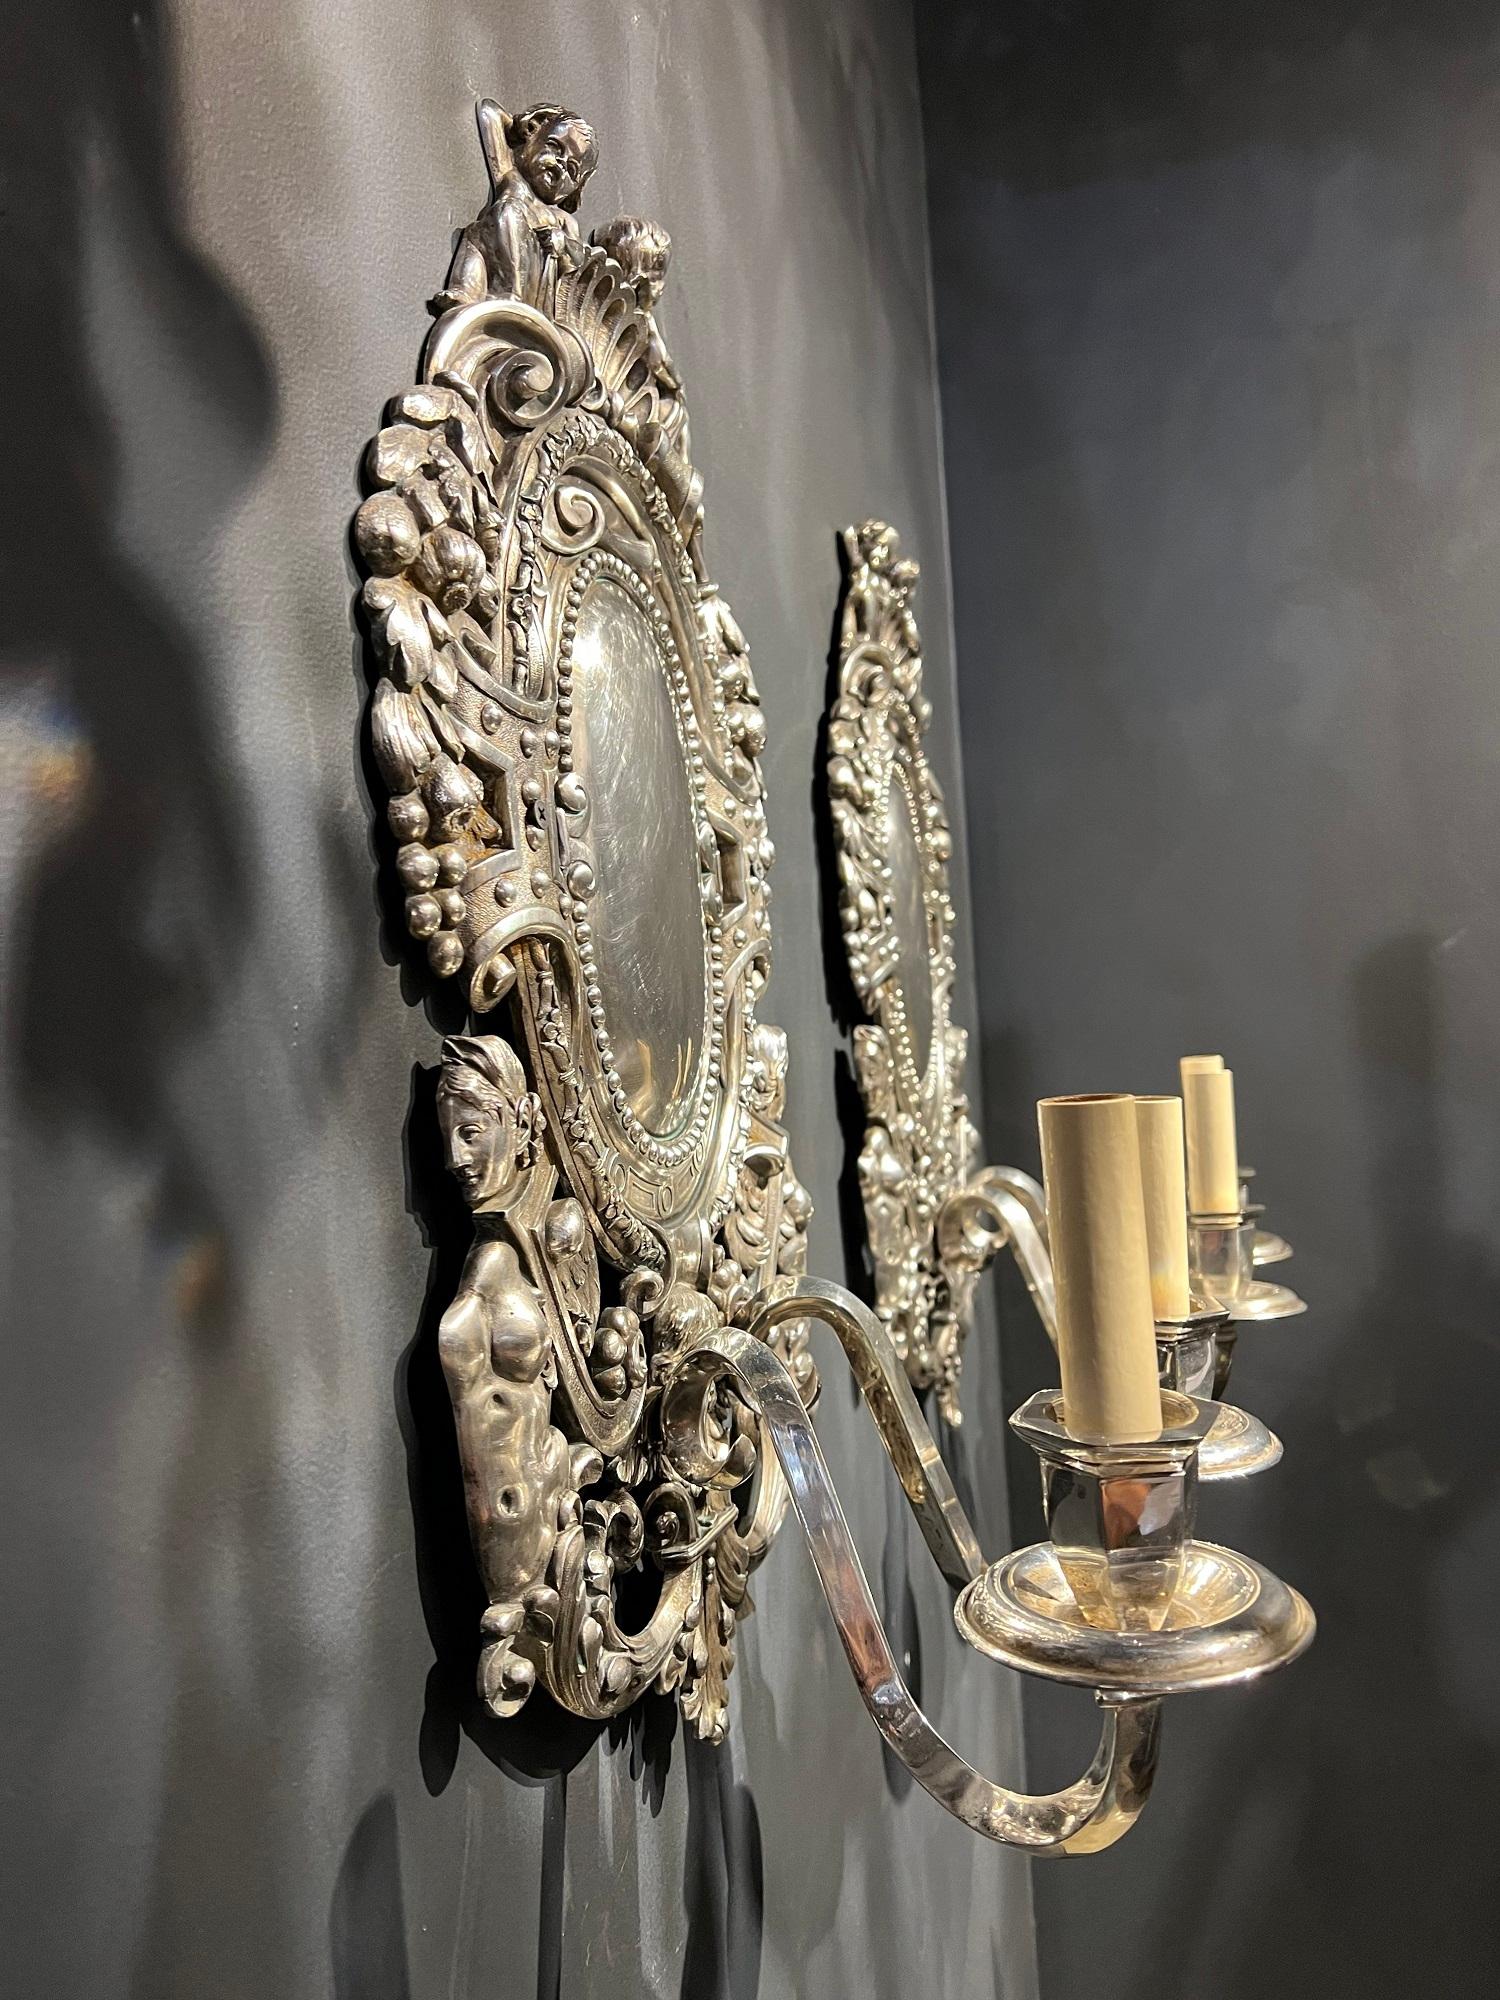 A pair of circa 1920’s Caldwell neoclassic style large sconces with cherubs and mermaids on design and two arms for lights